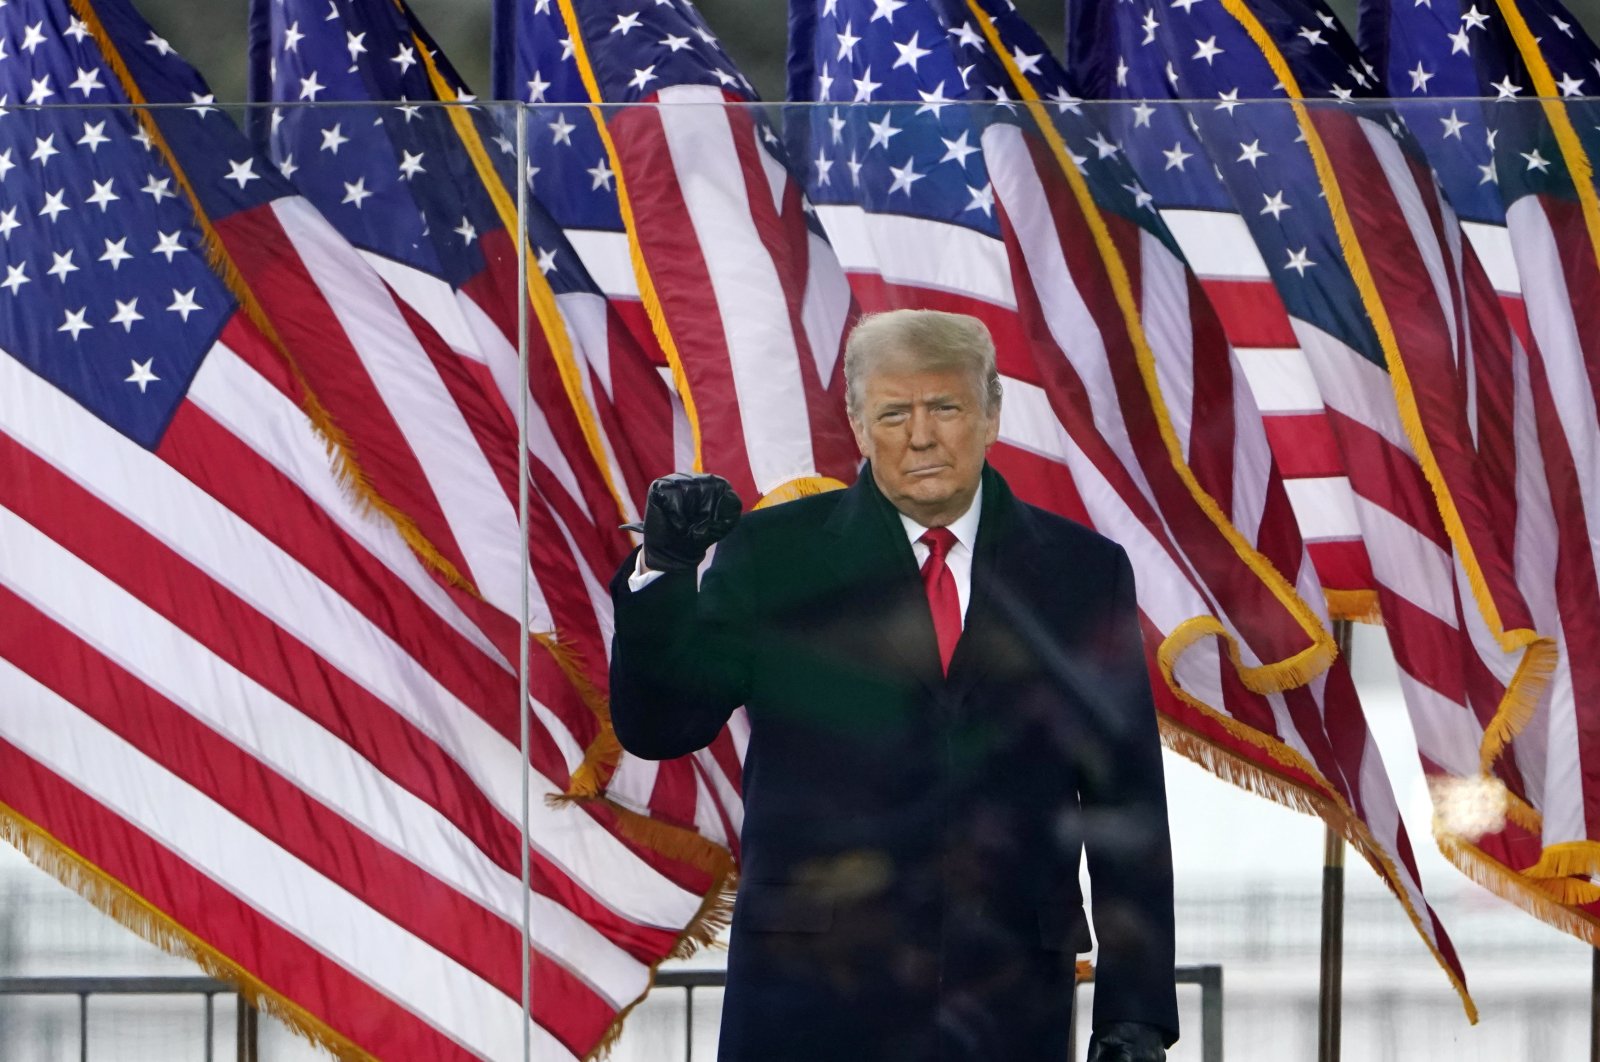 President Donald Trump arrives to speak at a rally Wednesday, Jan. 6, 2021, in Washington. (AP Photo)